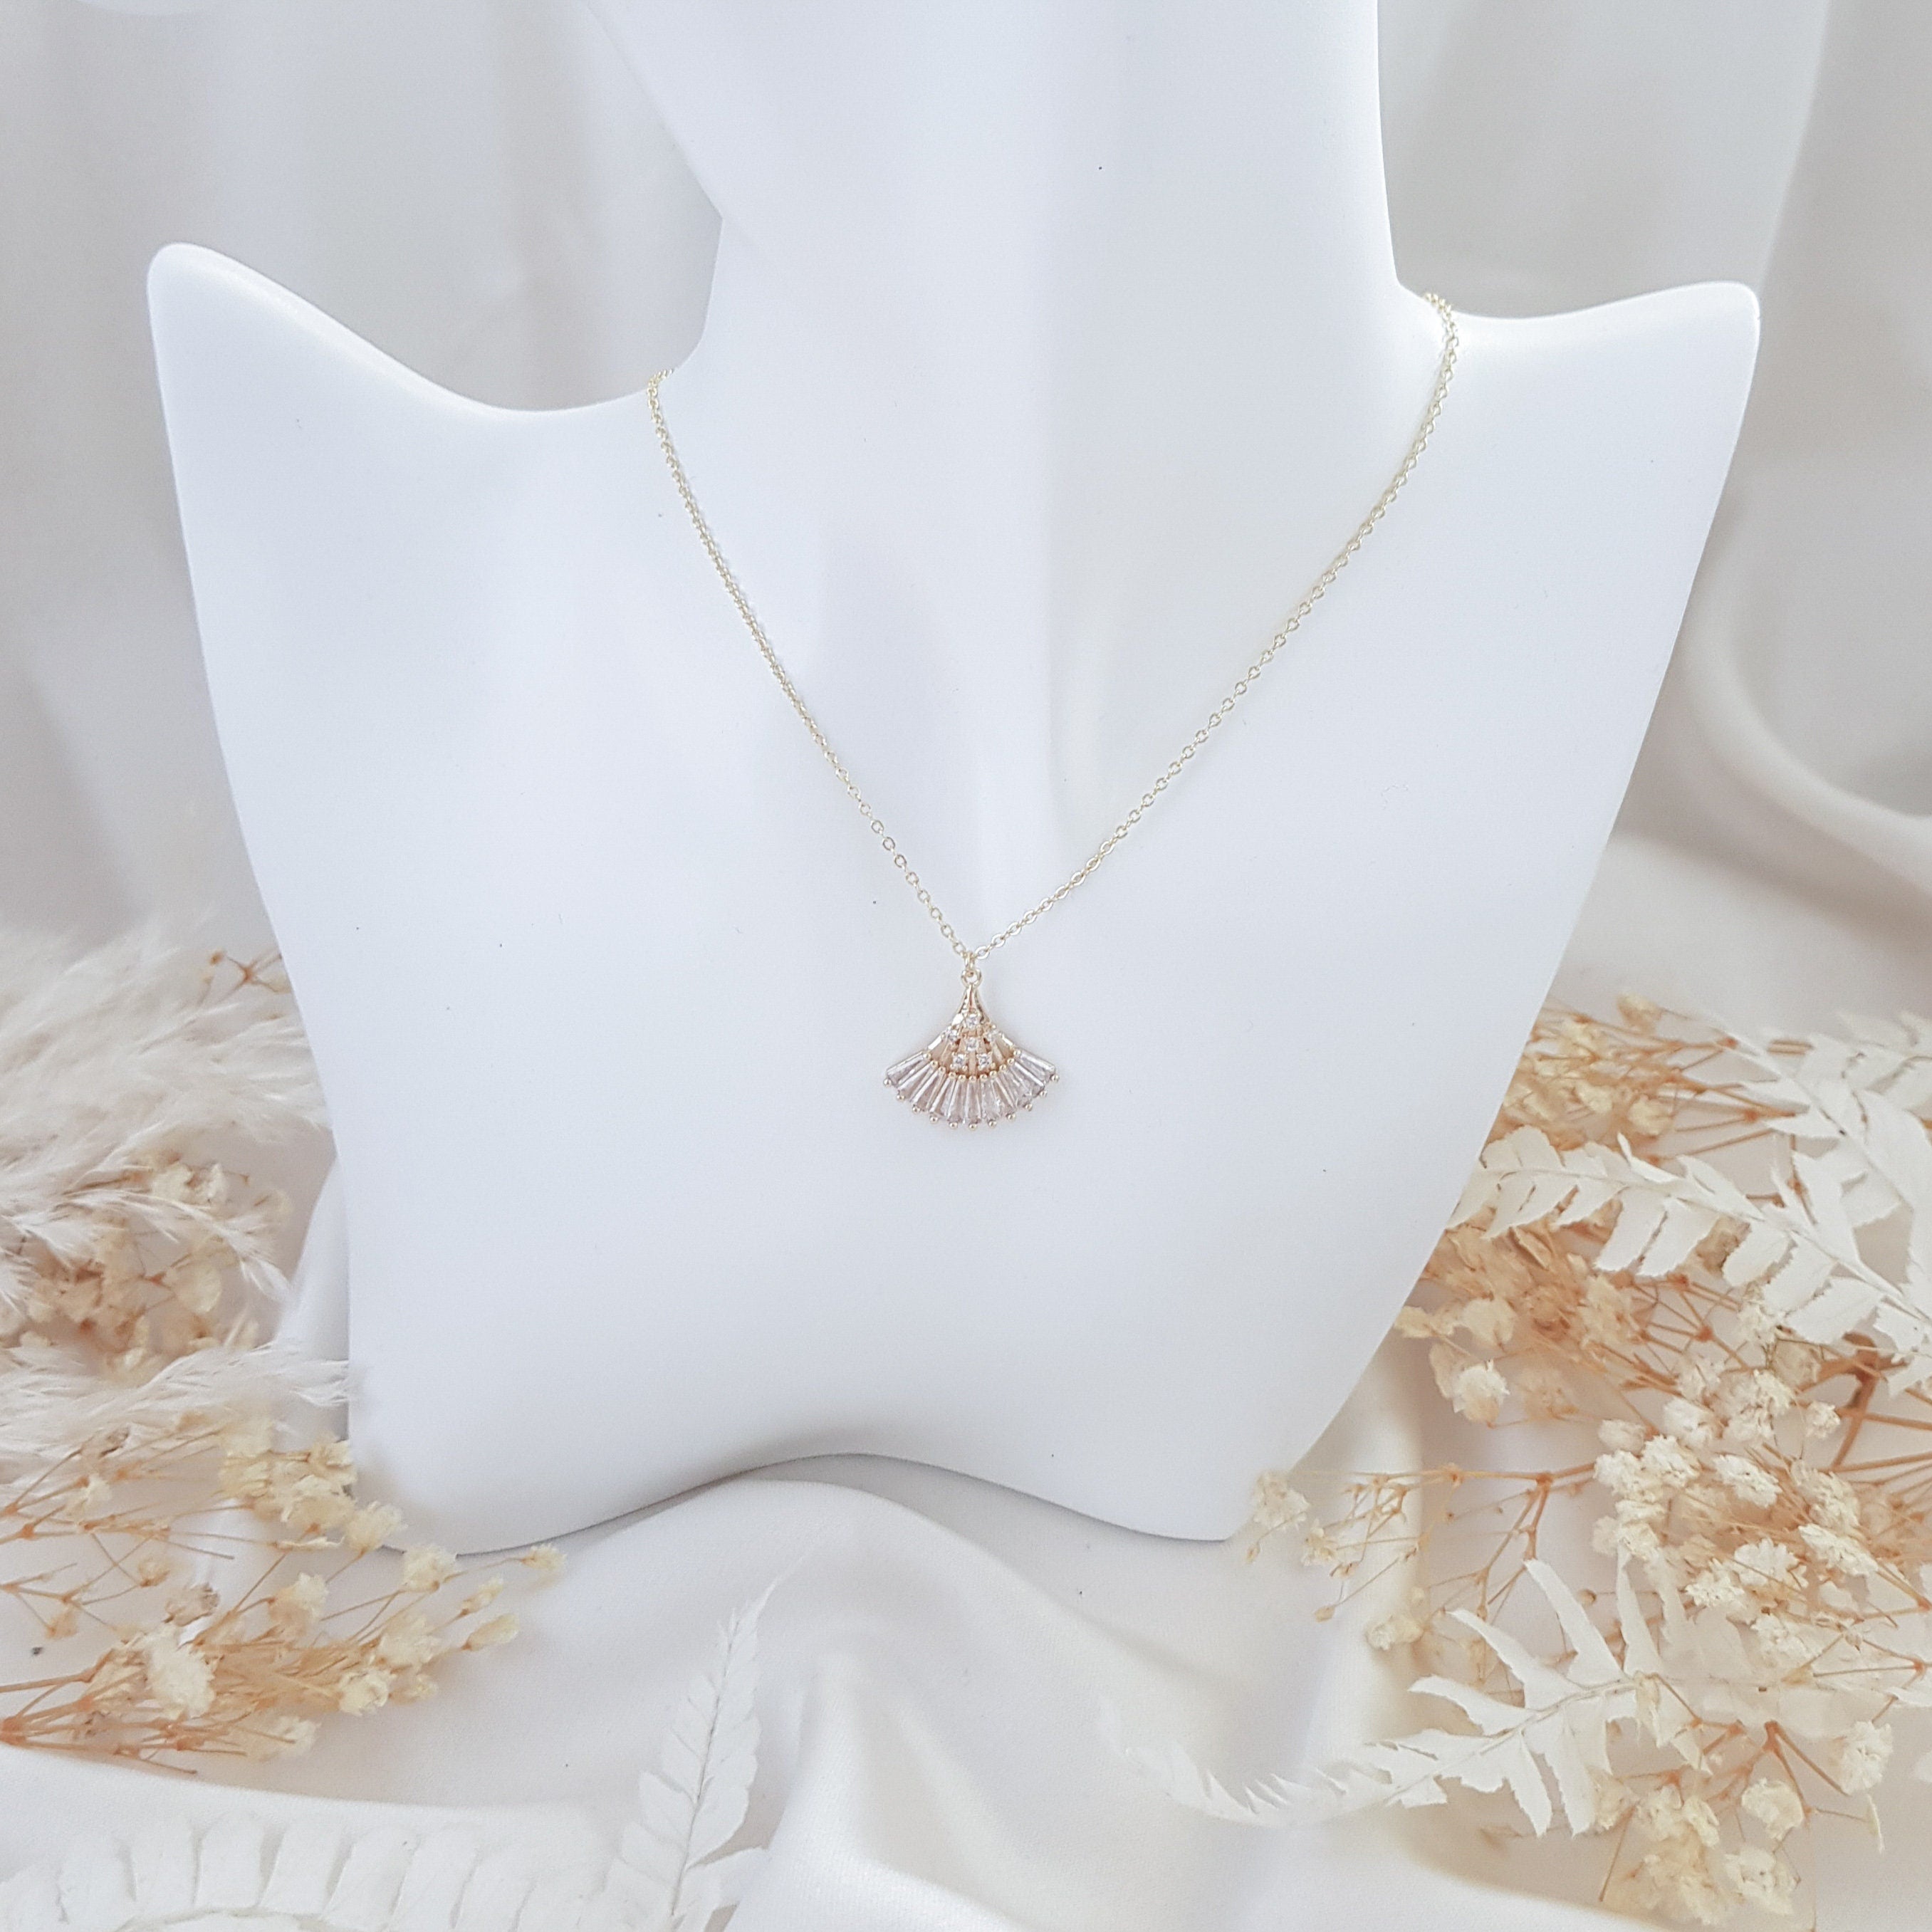 Bridal Necklace, Art Deco Necklace, Crystal Necklace, Gold Fan Necklace, Wedding Necklace, Bridesmaid Gift, Bridal Jewelry